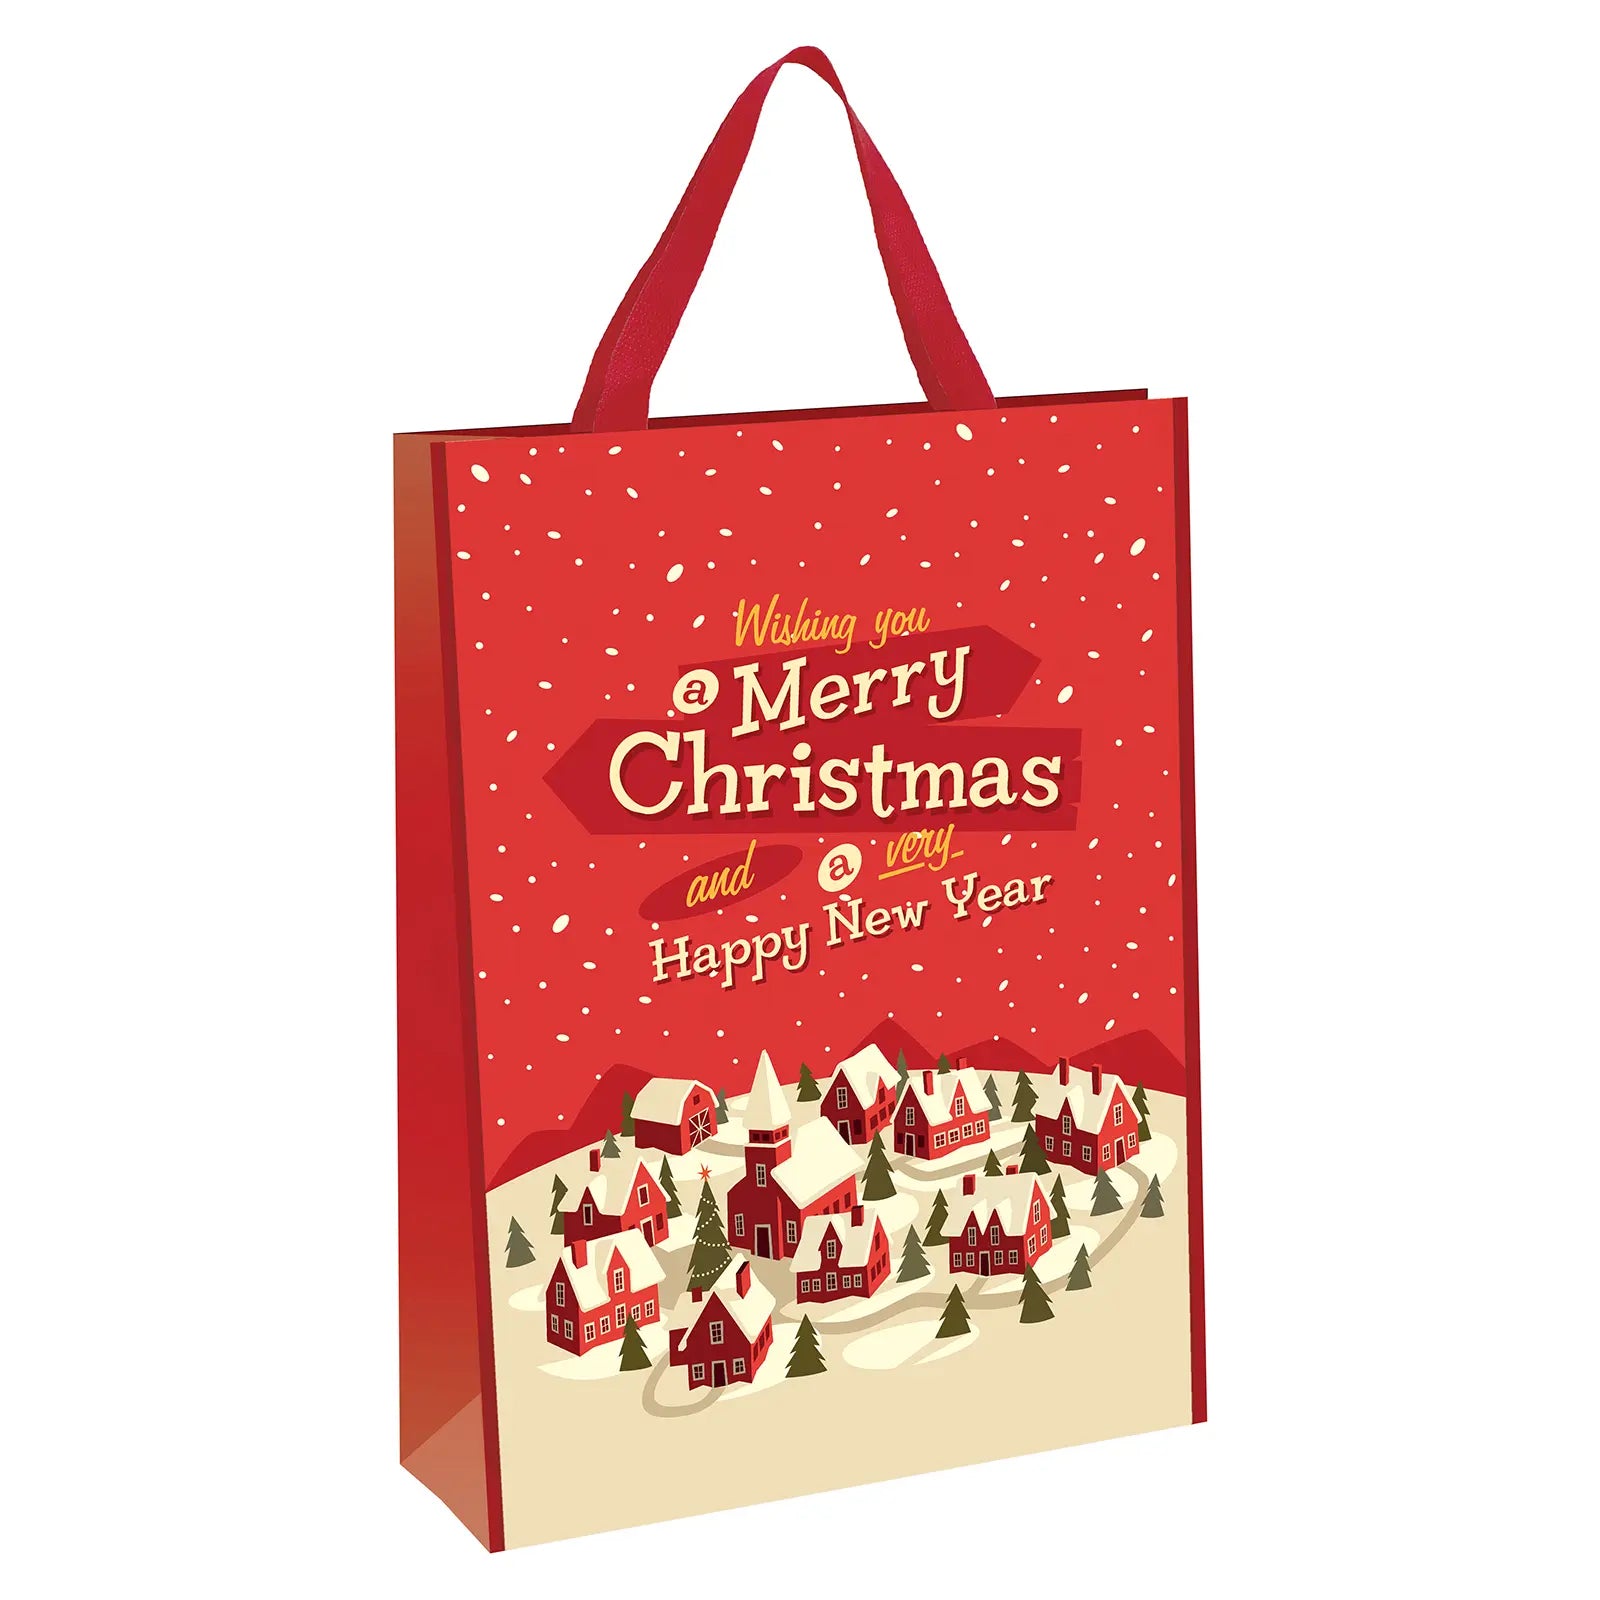 red merry christmas gift bag featuring cosy snow village scene with snow pattern behind slogan